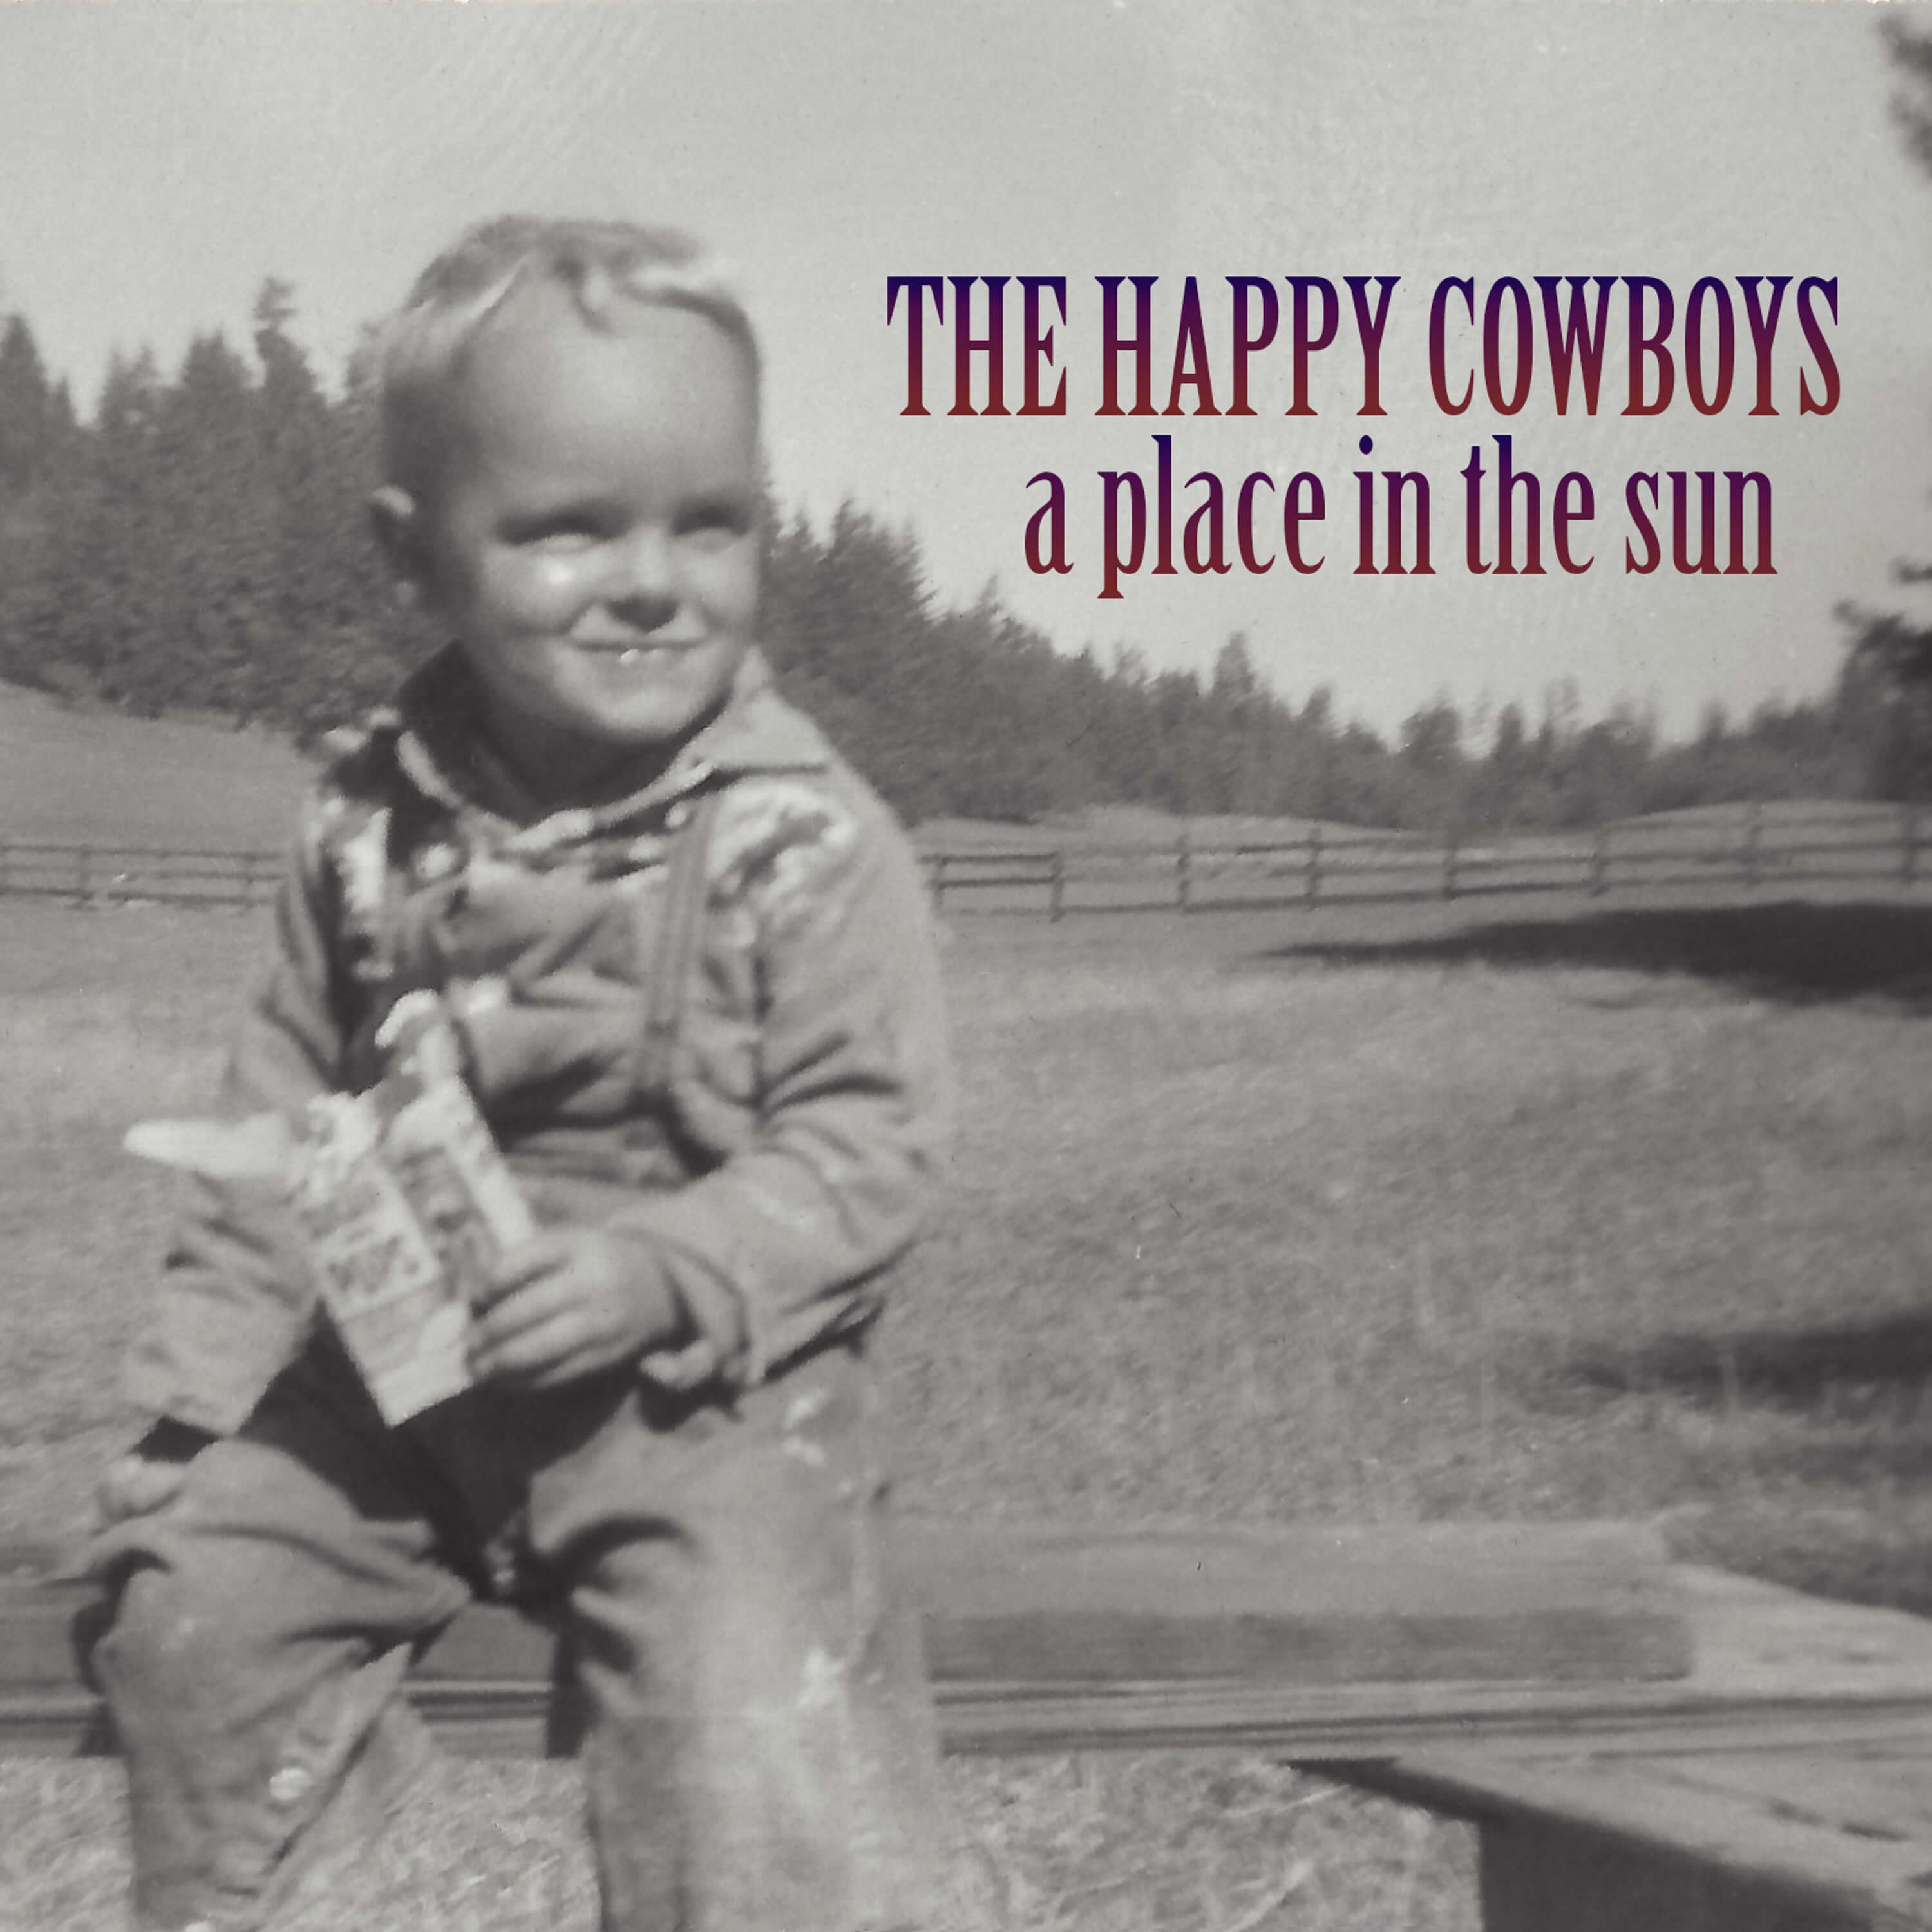 A Place in the Sun - The Happy Cowboys